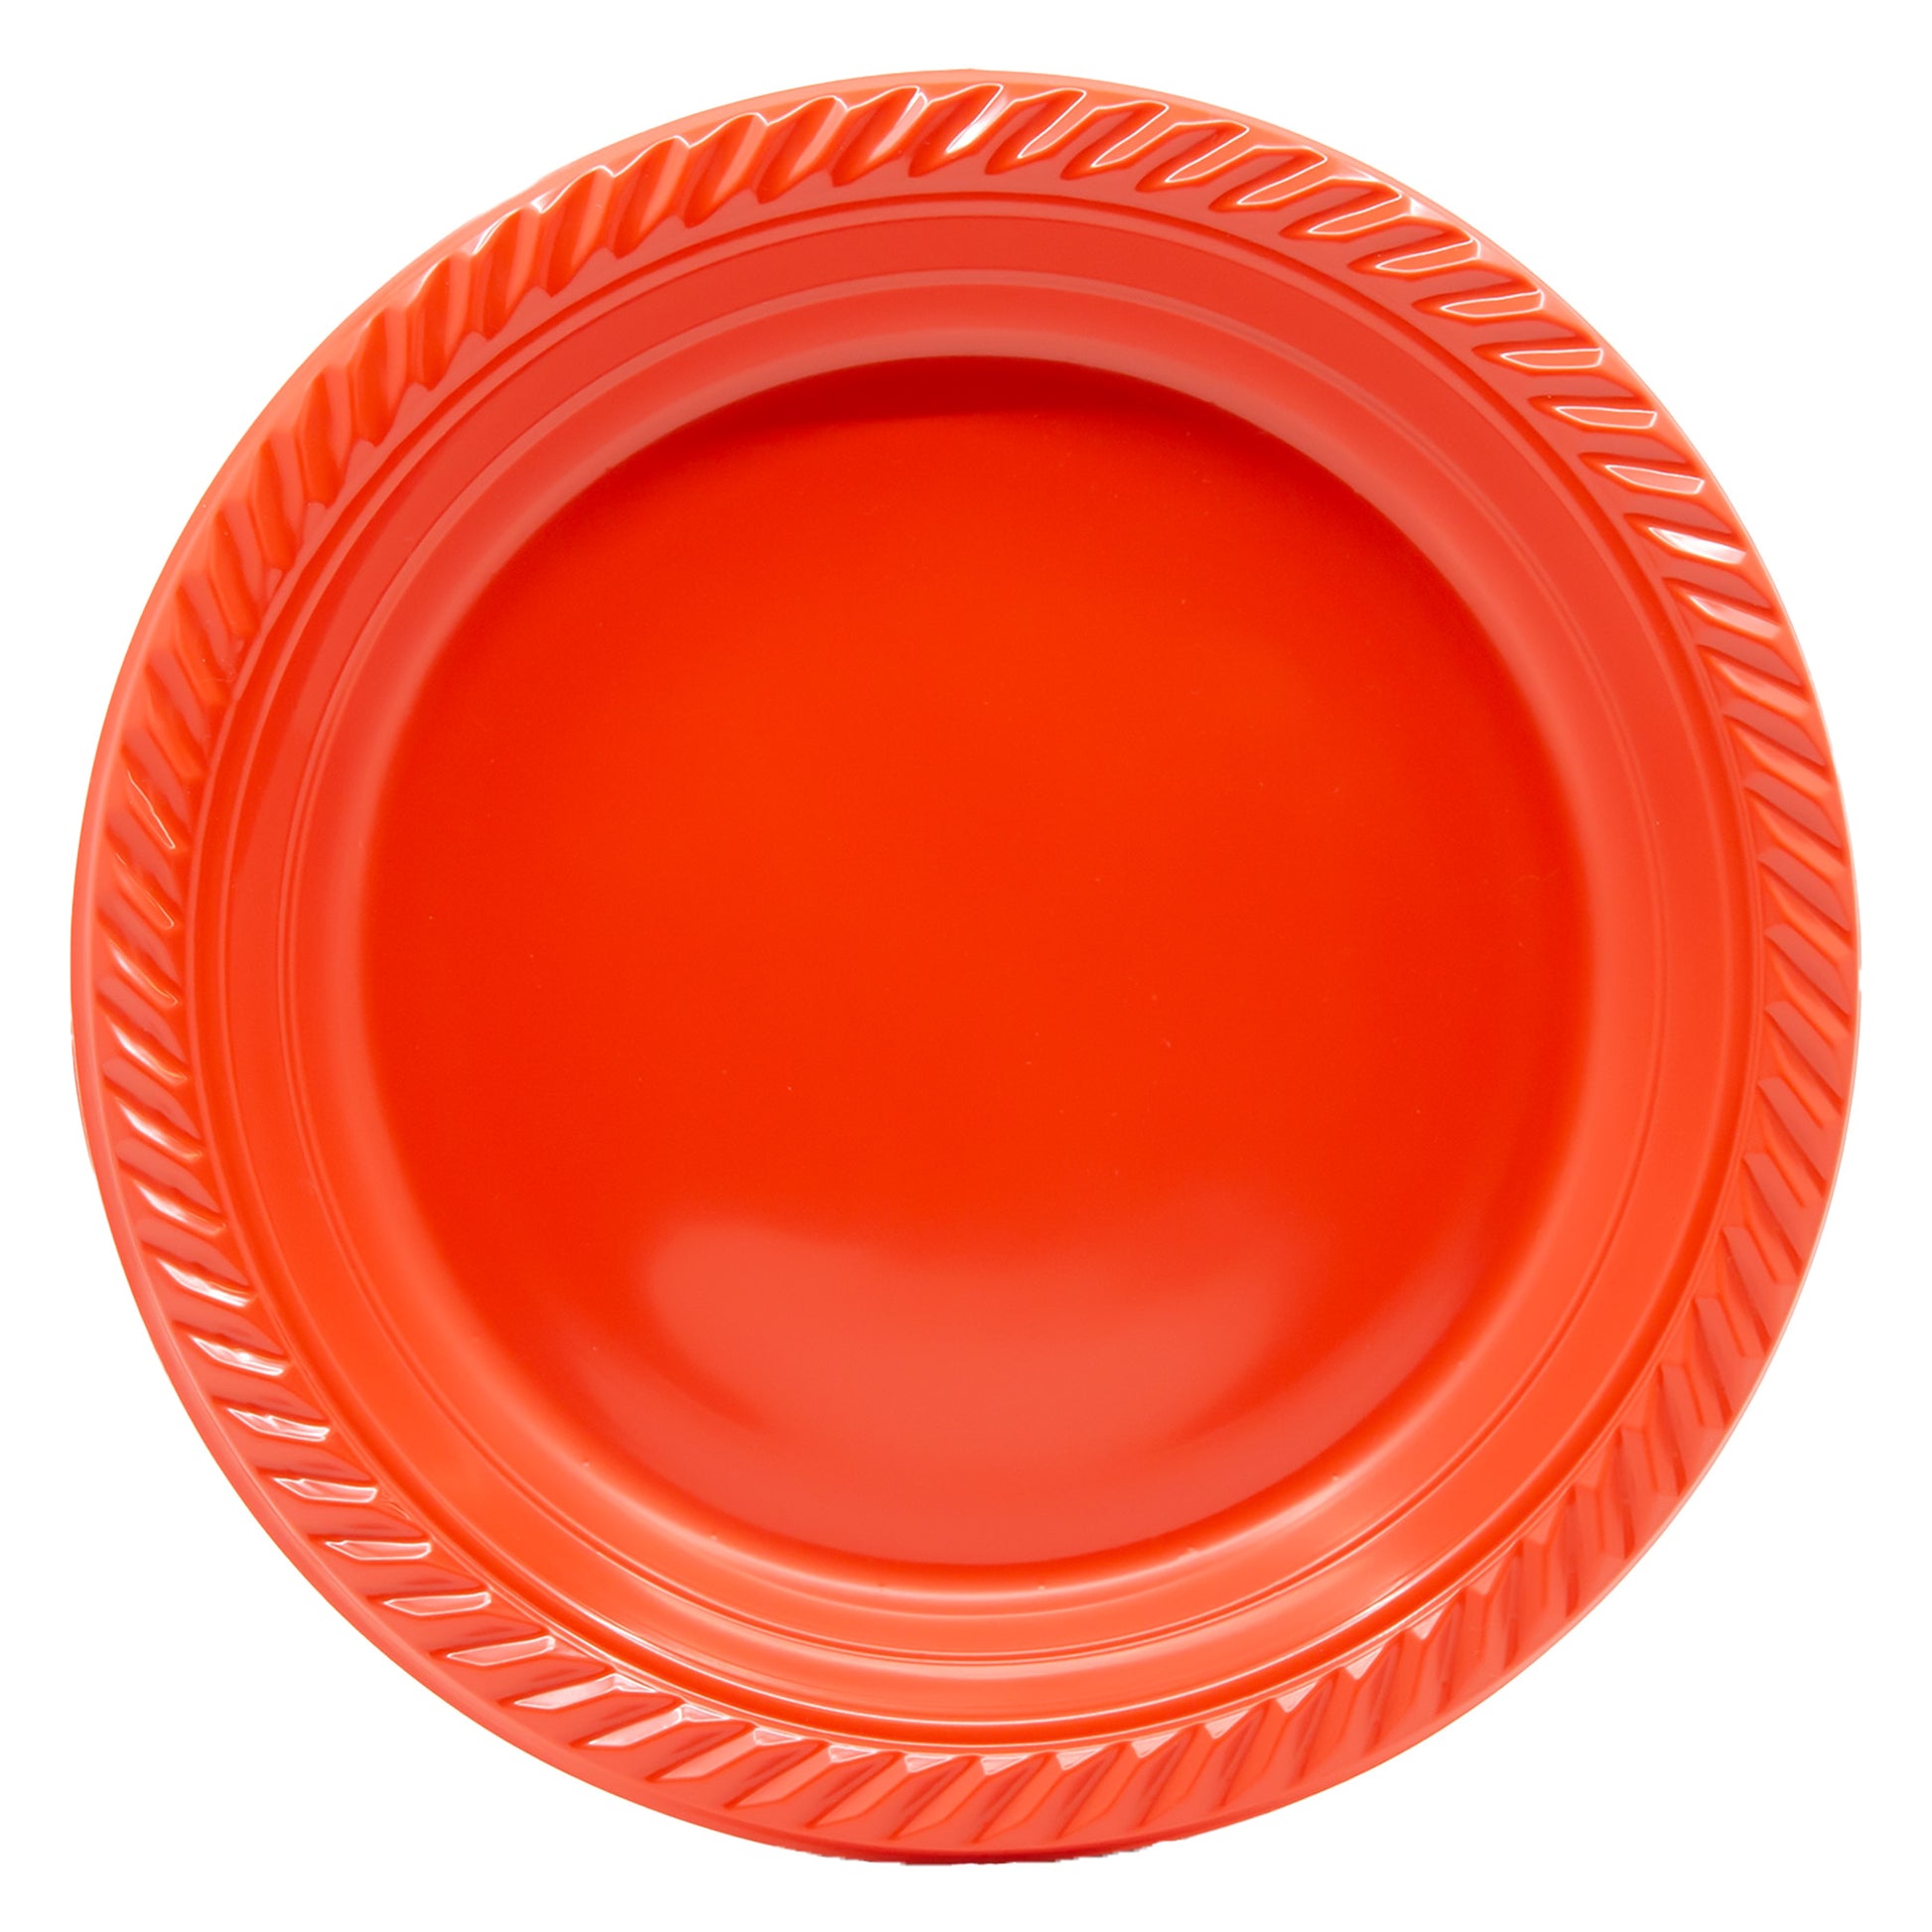 Ideal Dining 10" Light Weight Disposable Red Plastic plates Good to use in Microwave Plastic Plates Ideal Dining   